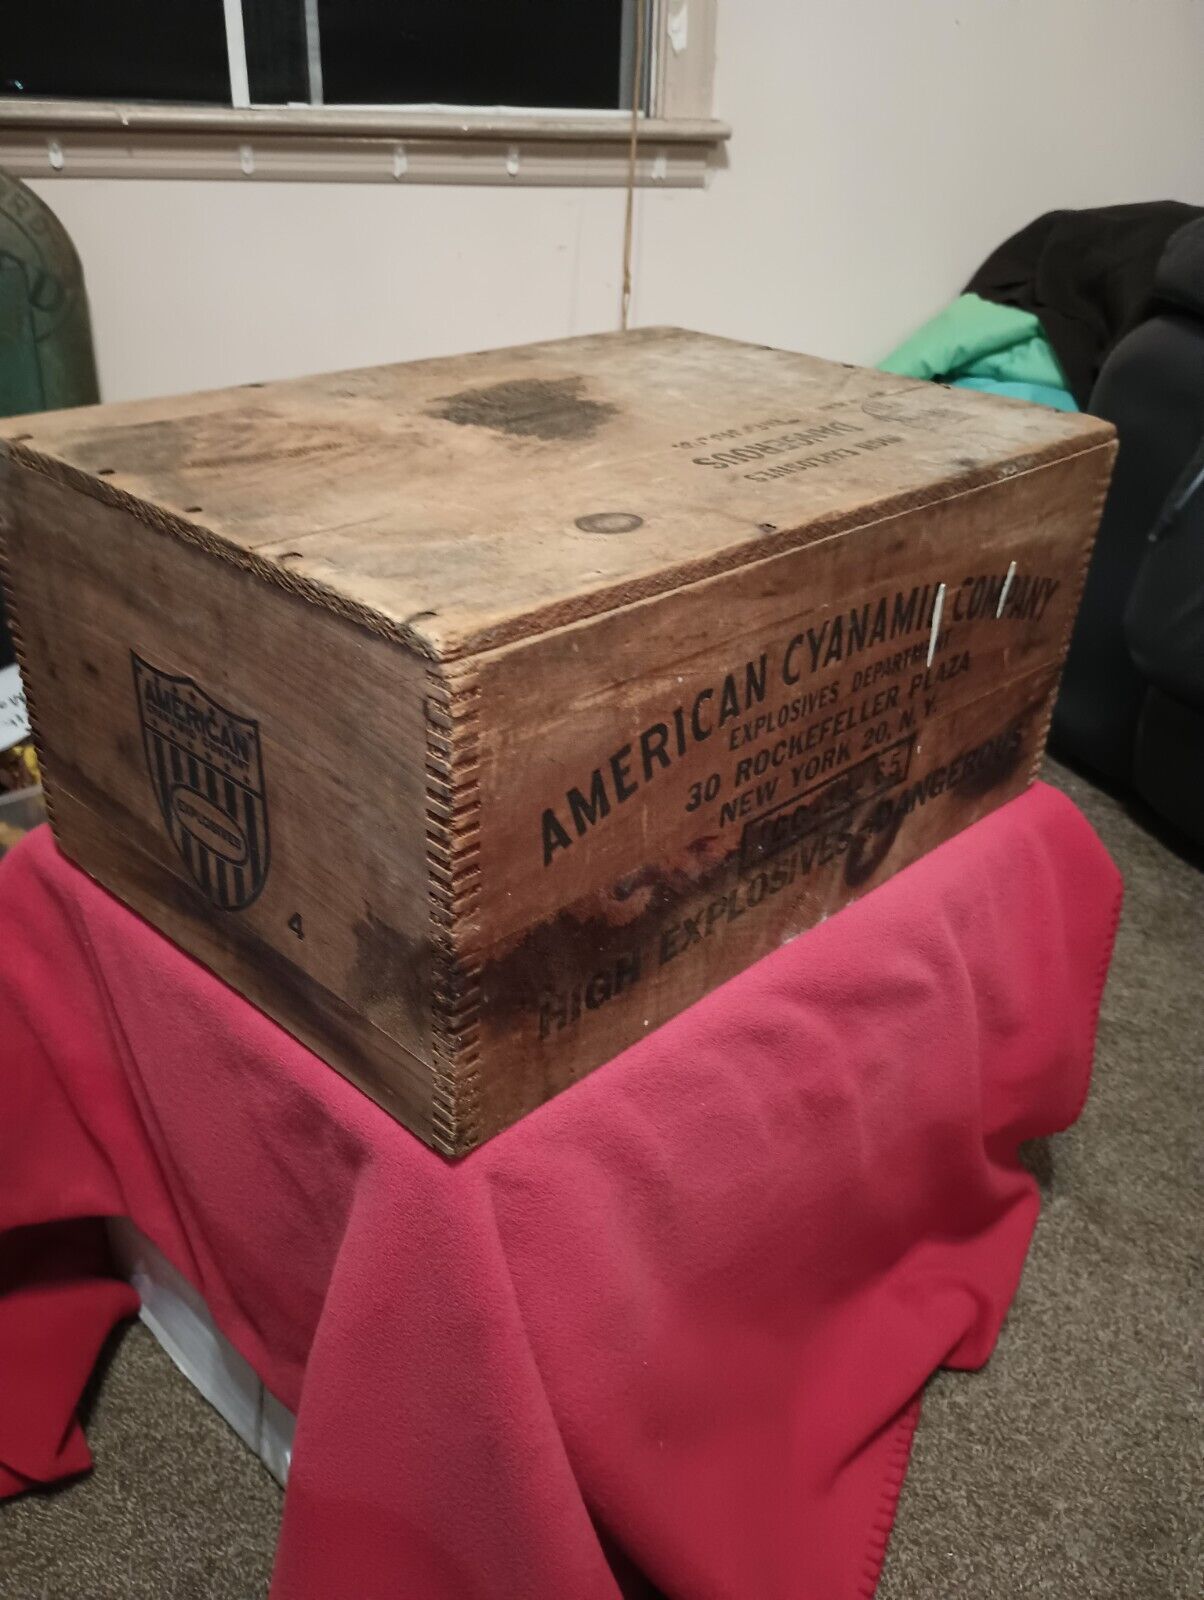 Antique American Cyanamid 50lbs High Explosives Dynamite Box Advertising 🔥 rare